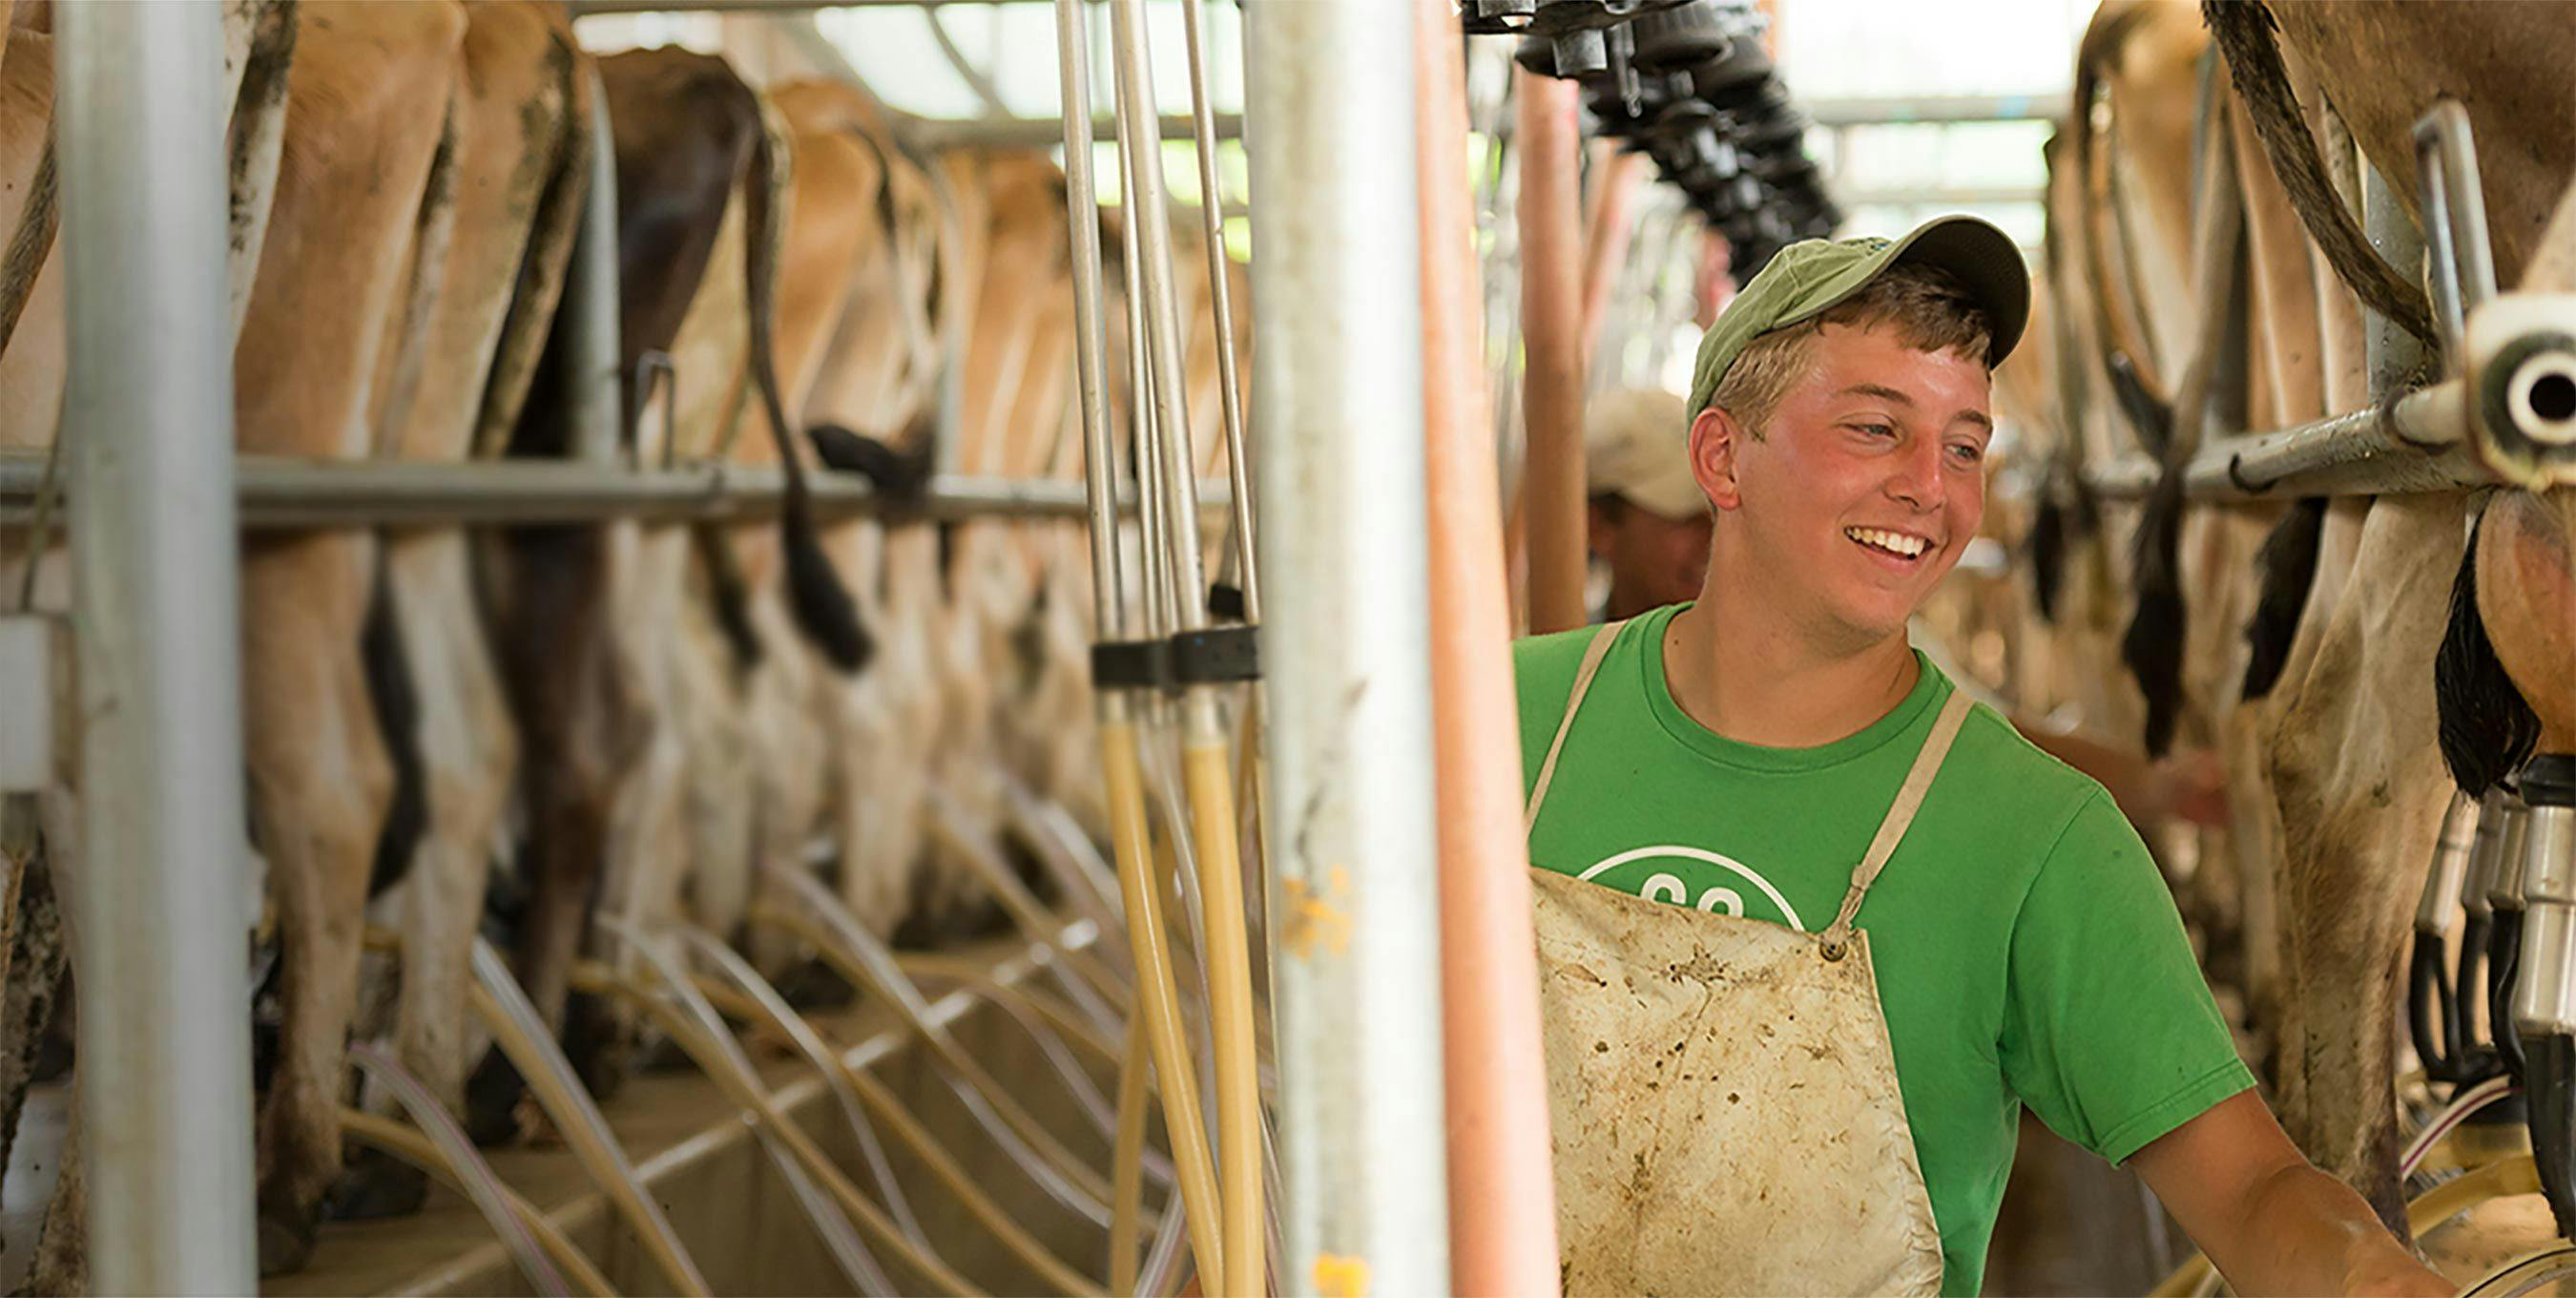 A farmer standing in his cow barn getting ready for milking.